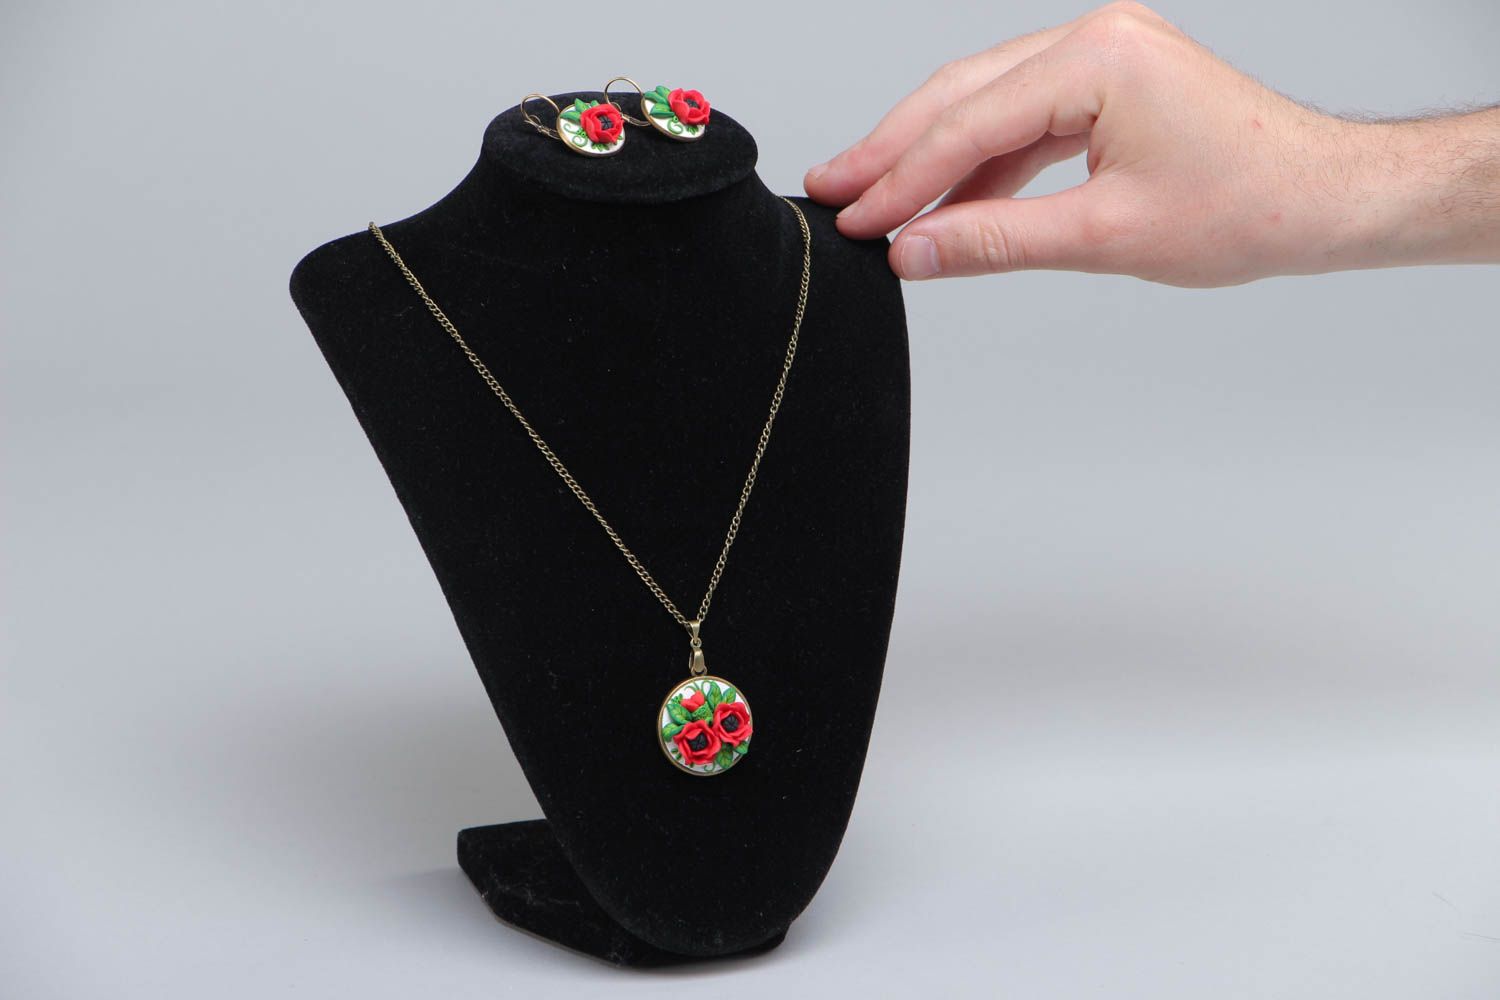 Homemade plastic jewelry set 2 pieces designer earrings and pendant Red Poppies photo 5